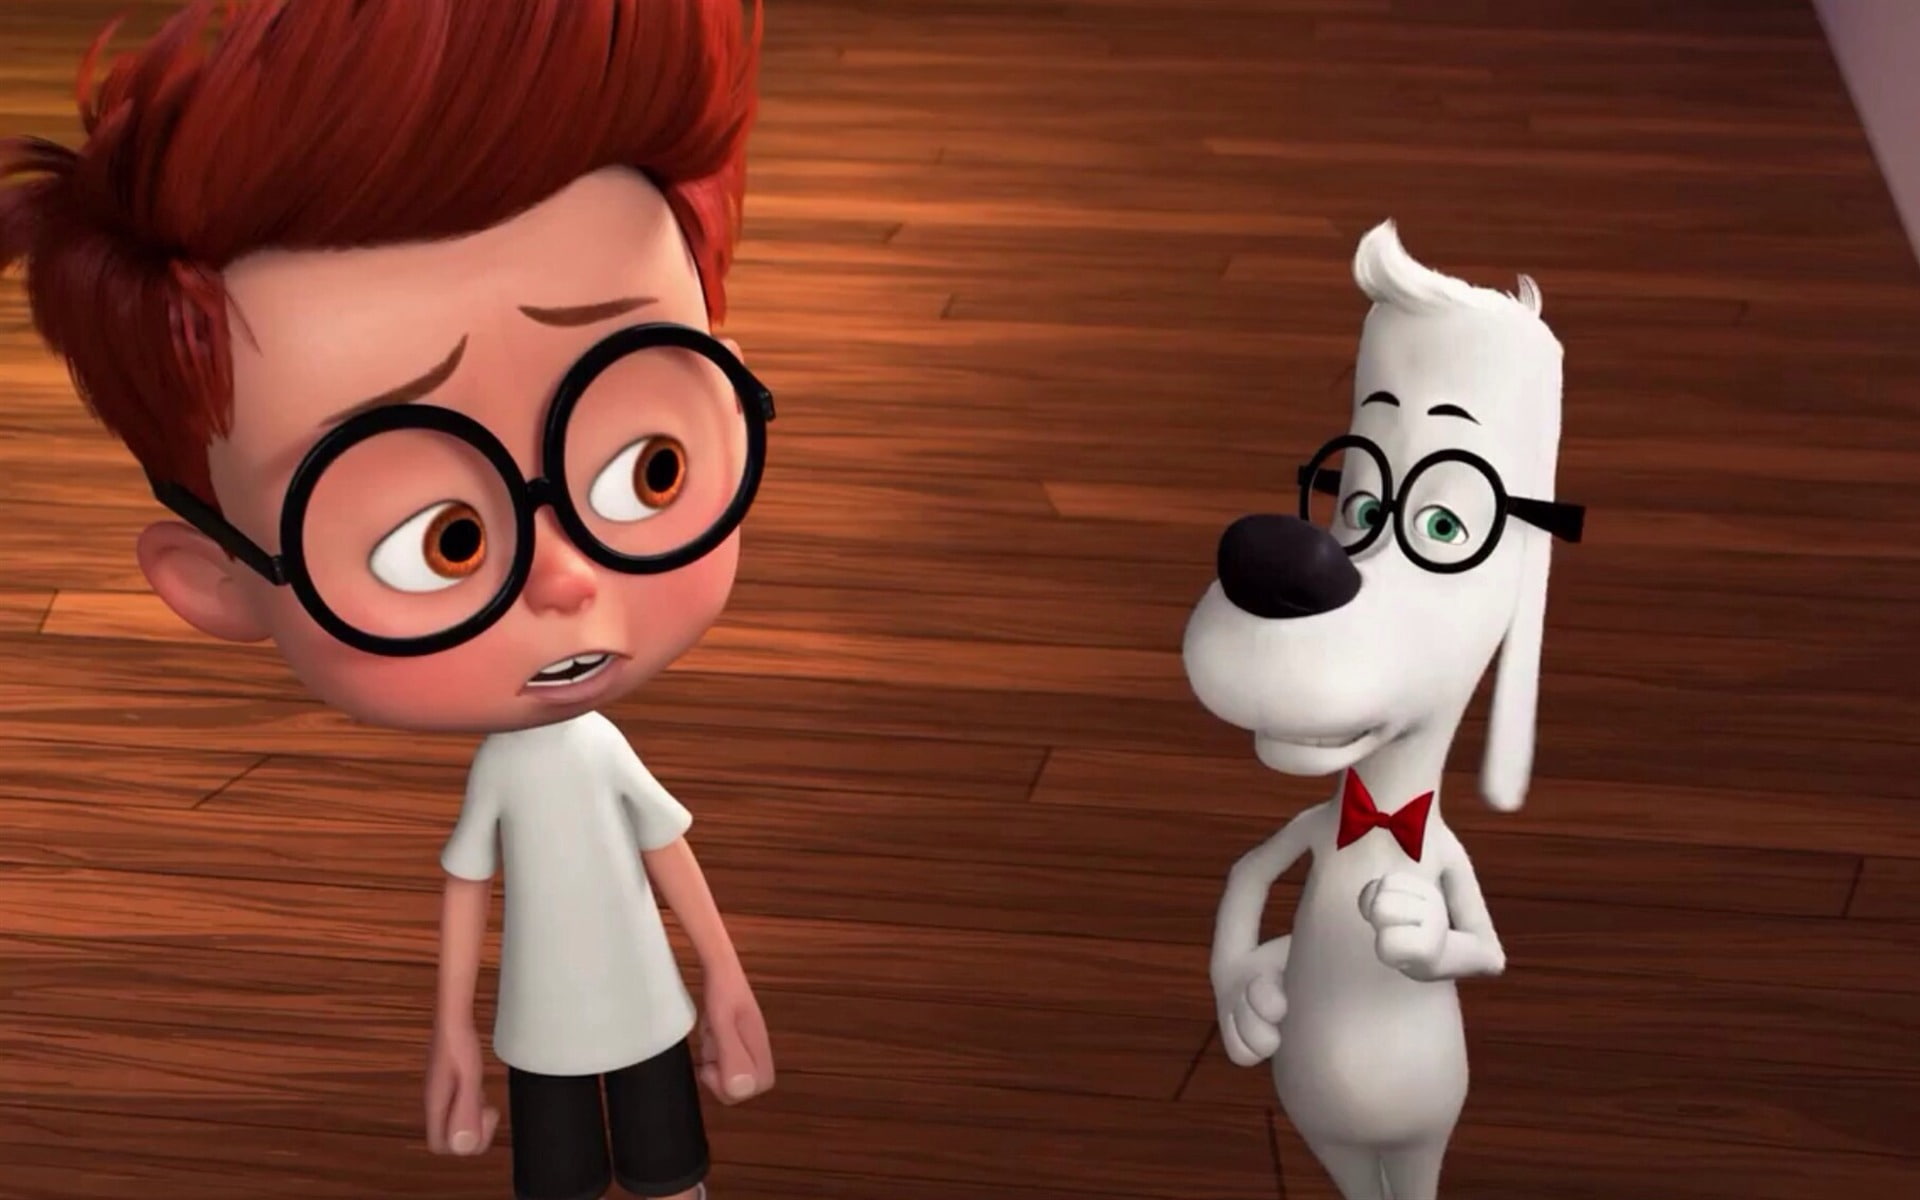 Mr Peabody And Sherman 2014 Movie HD Wallpaper 02, brown-haired boy cartoon illustration